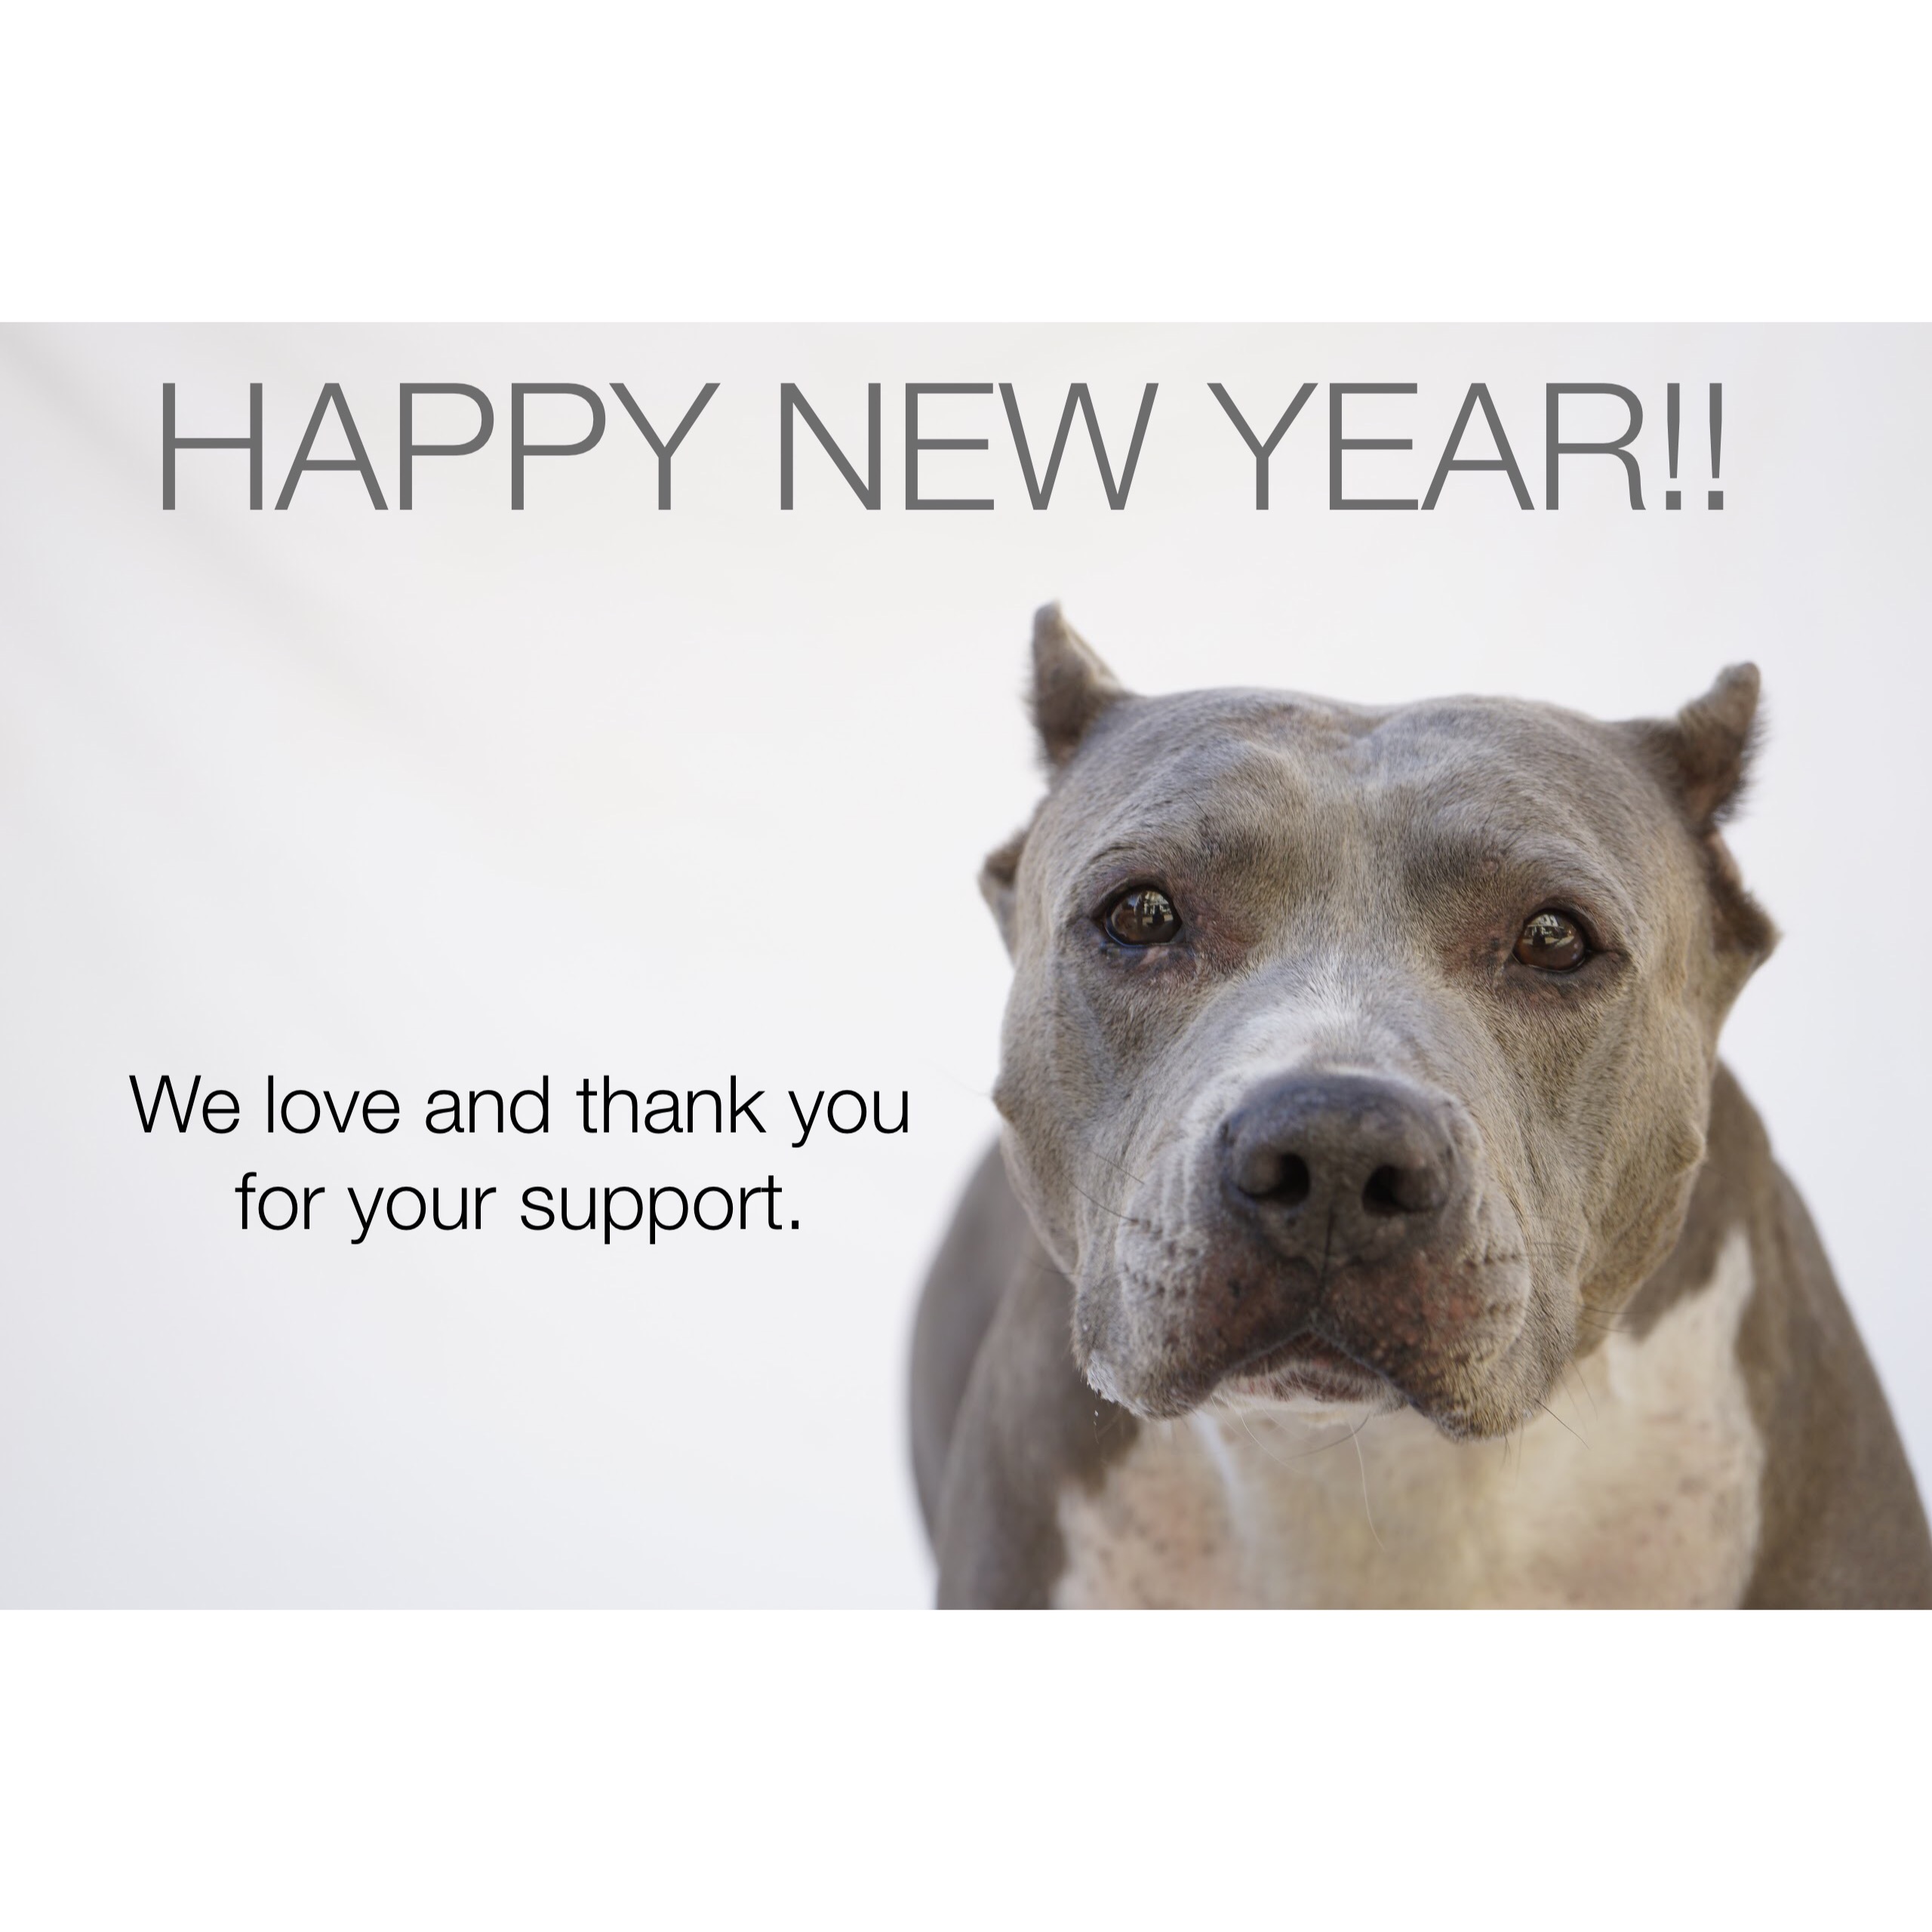 HAPPY NEW YEAR SUFP SUPPORTERS!